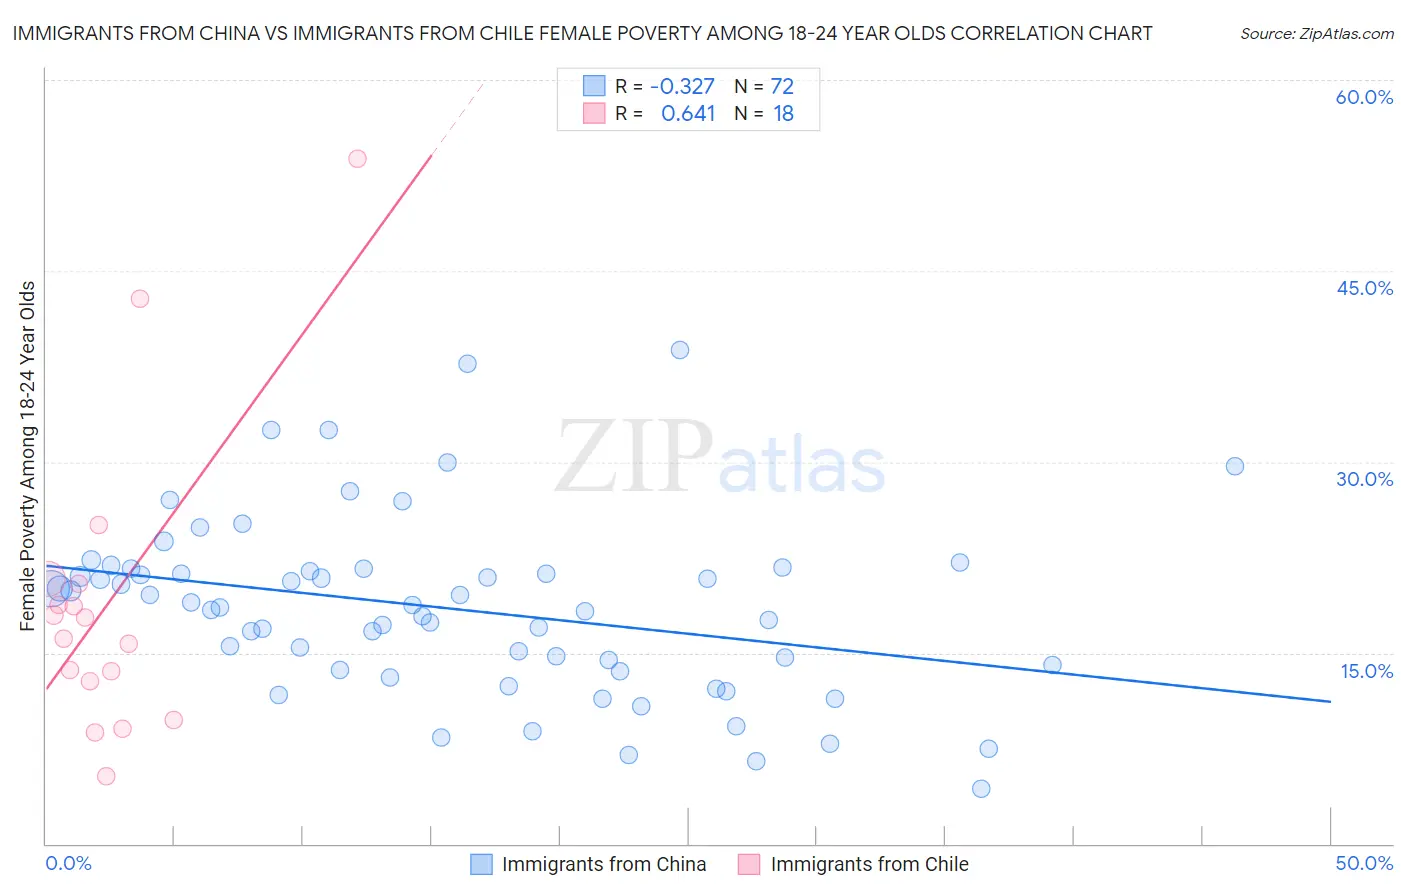 Immigrants from China vs Immigrants from Chile Female Poverty Among 18-24 Year Olds